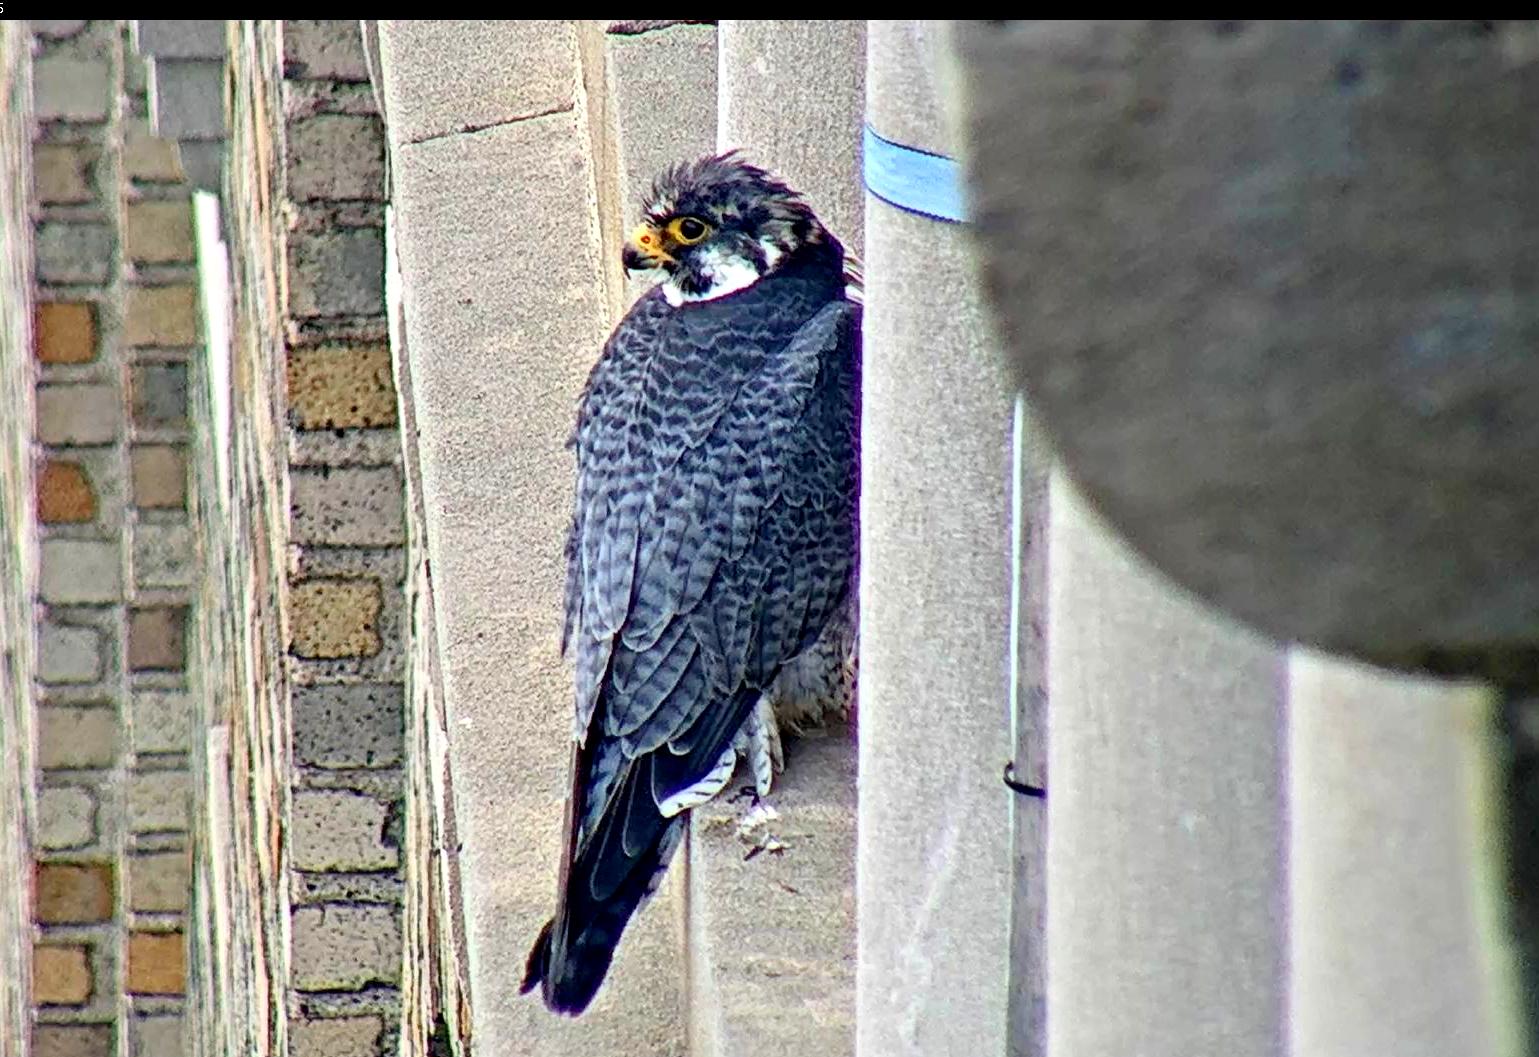 Ares on a window ledge west of the nest box